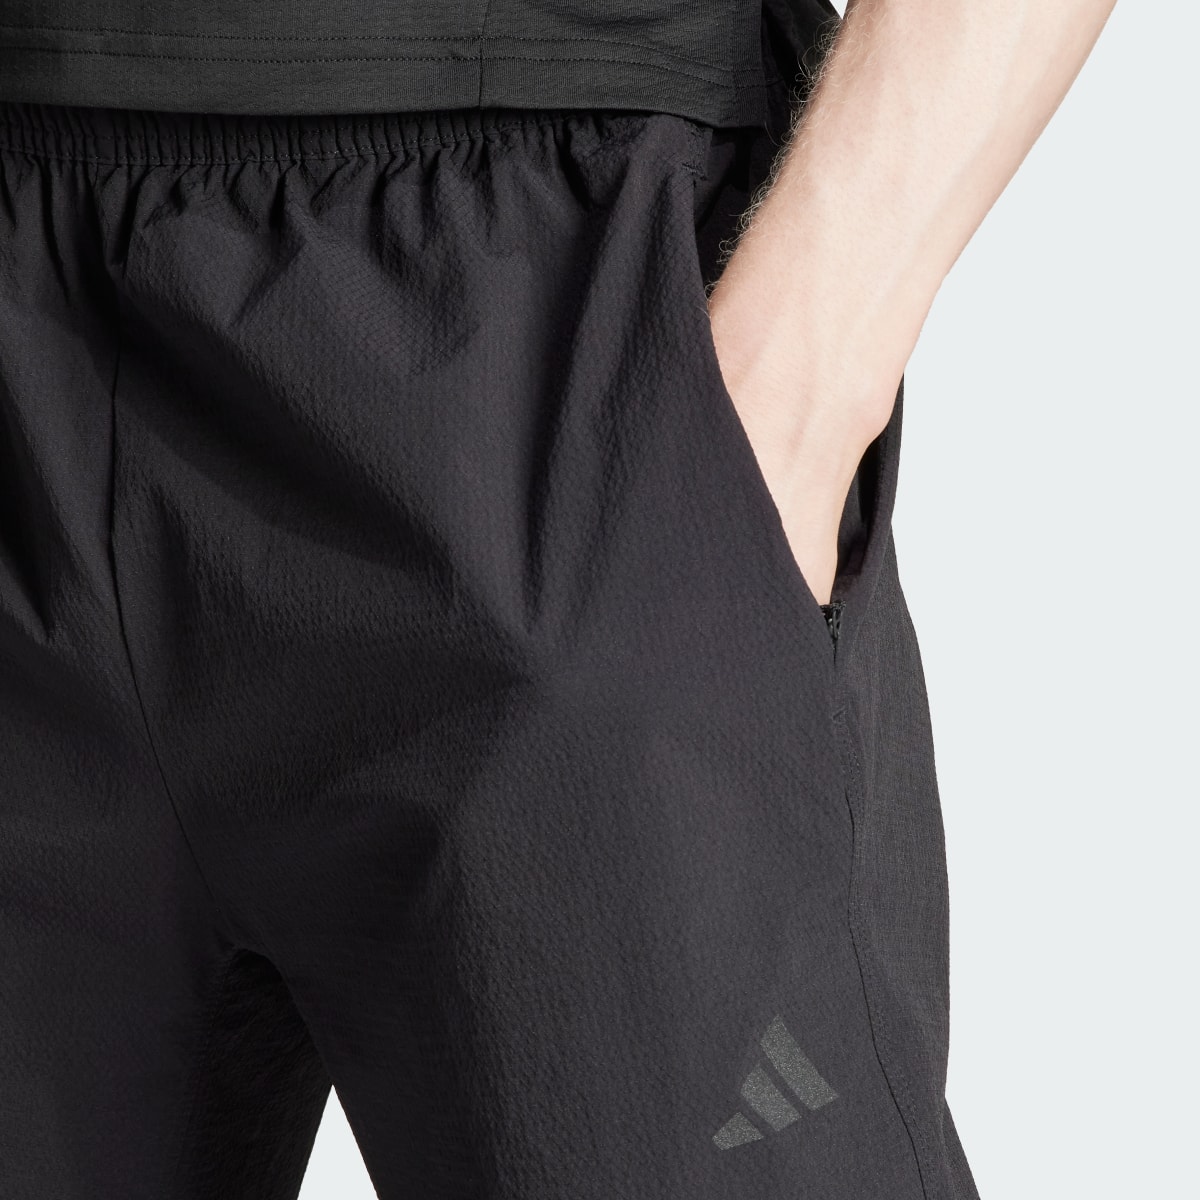 Adidas Designed for Training Workout Pants. 6